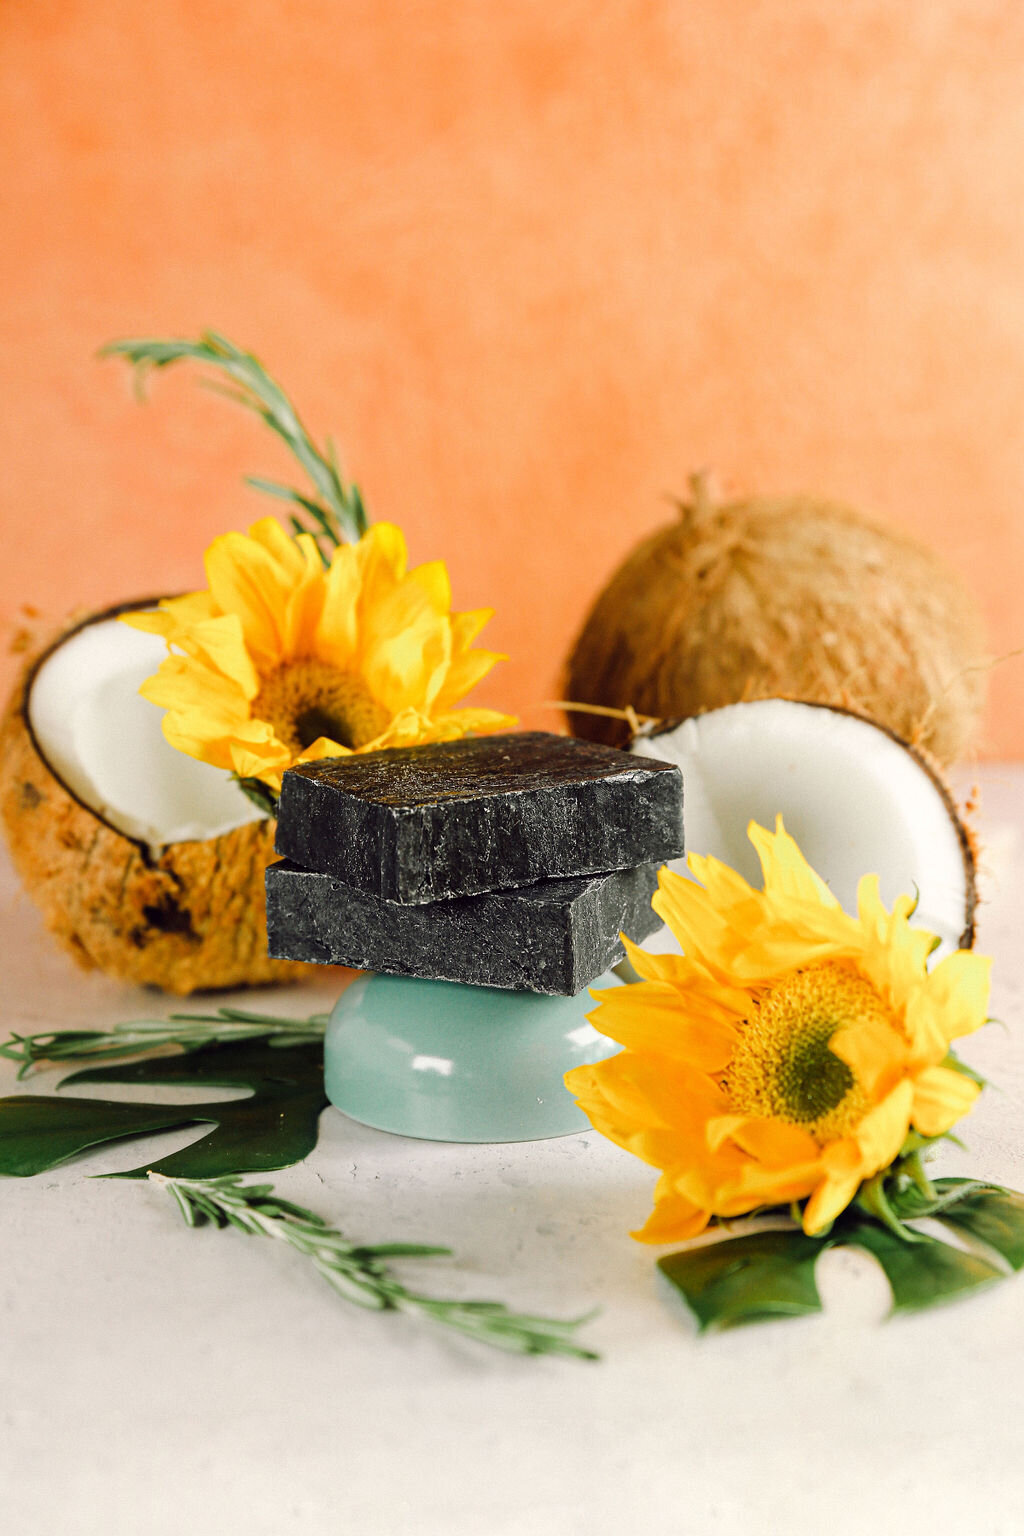 Charcoal soap product photography styled with coconuts and sunflowers for a fun, fresh, and vegan small business.